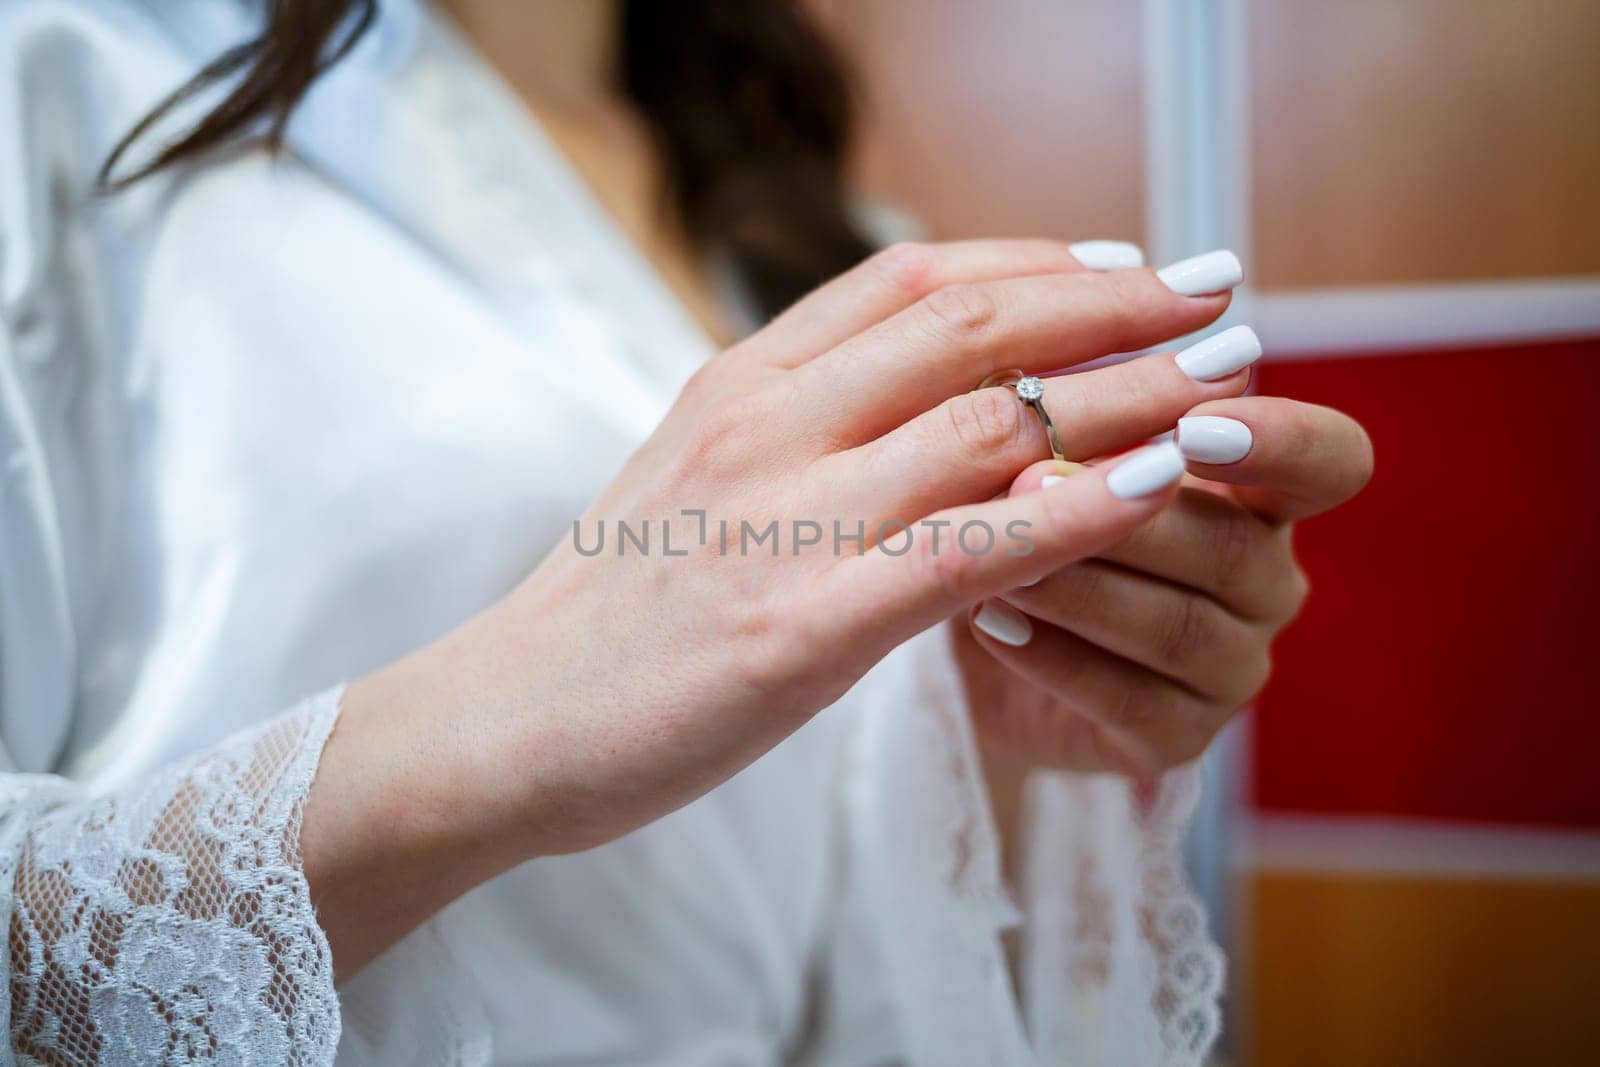 gold wedding rings in hands of newlyweds on wedding day by Dmitrytph